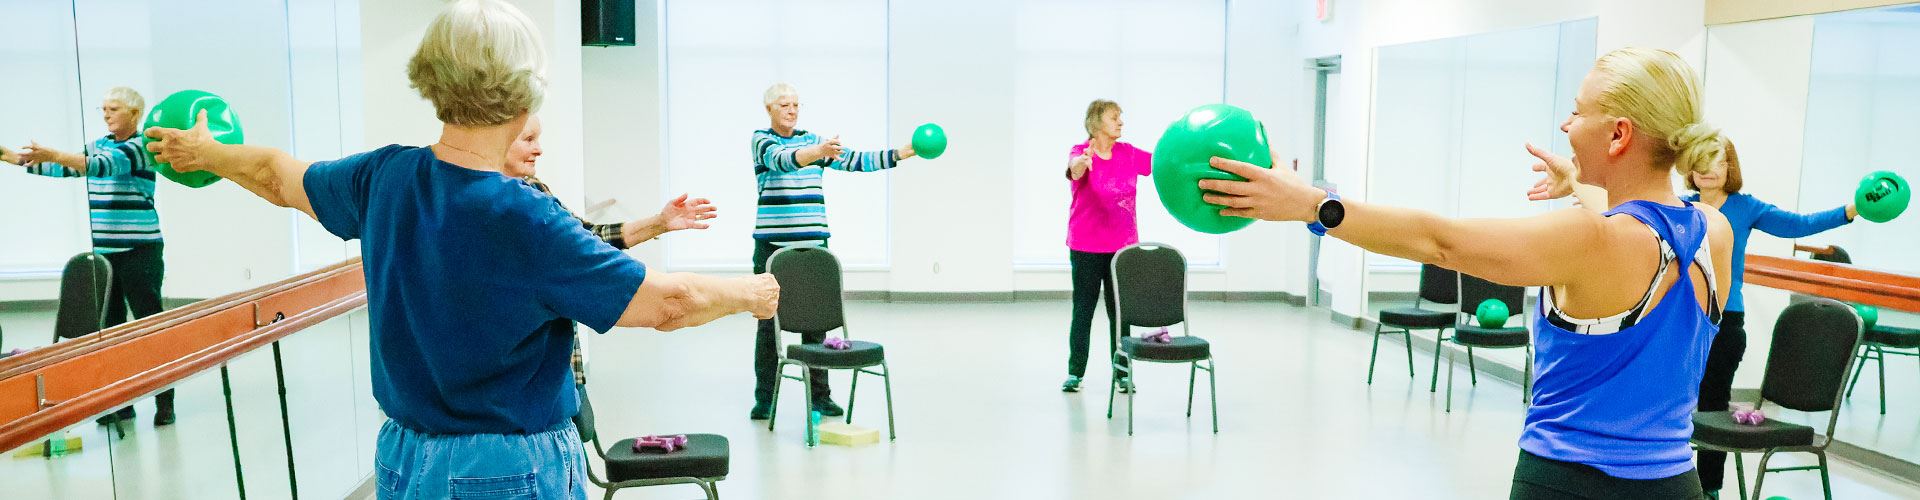 participants in exercise class holding green ball